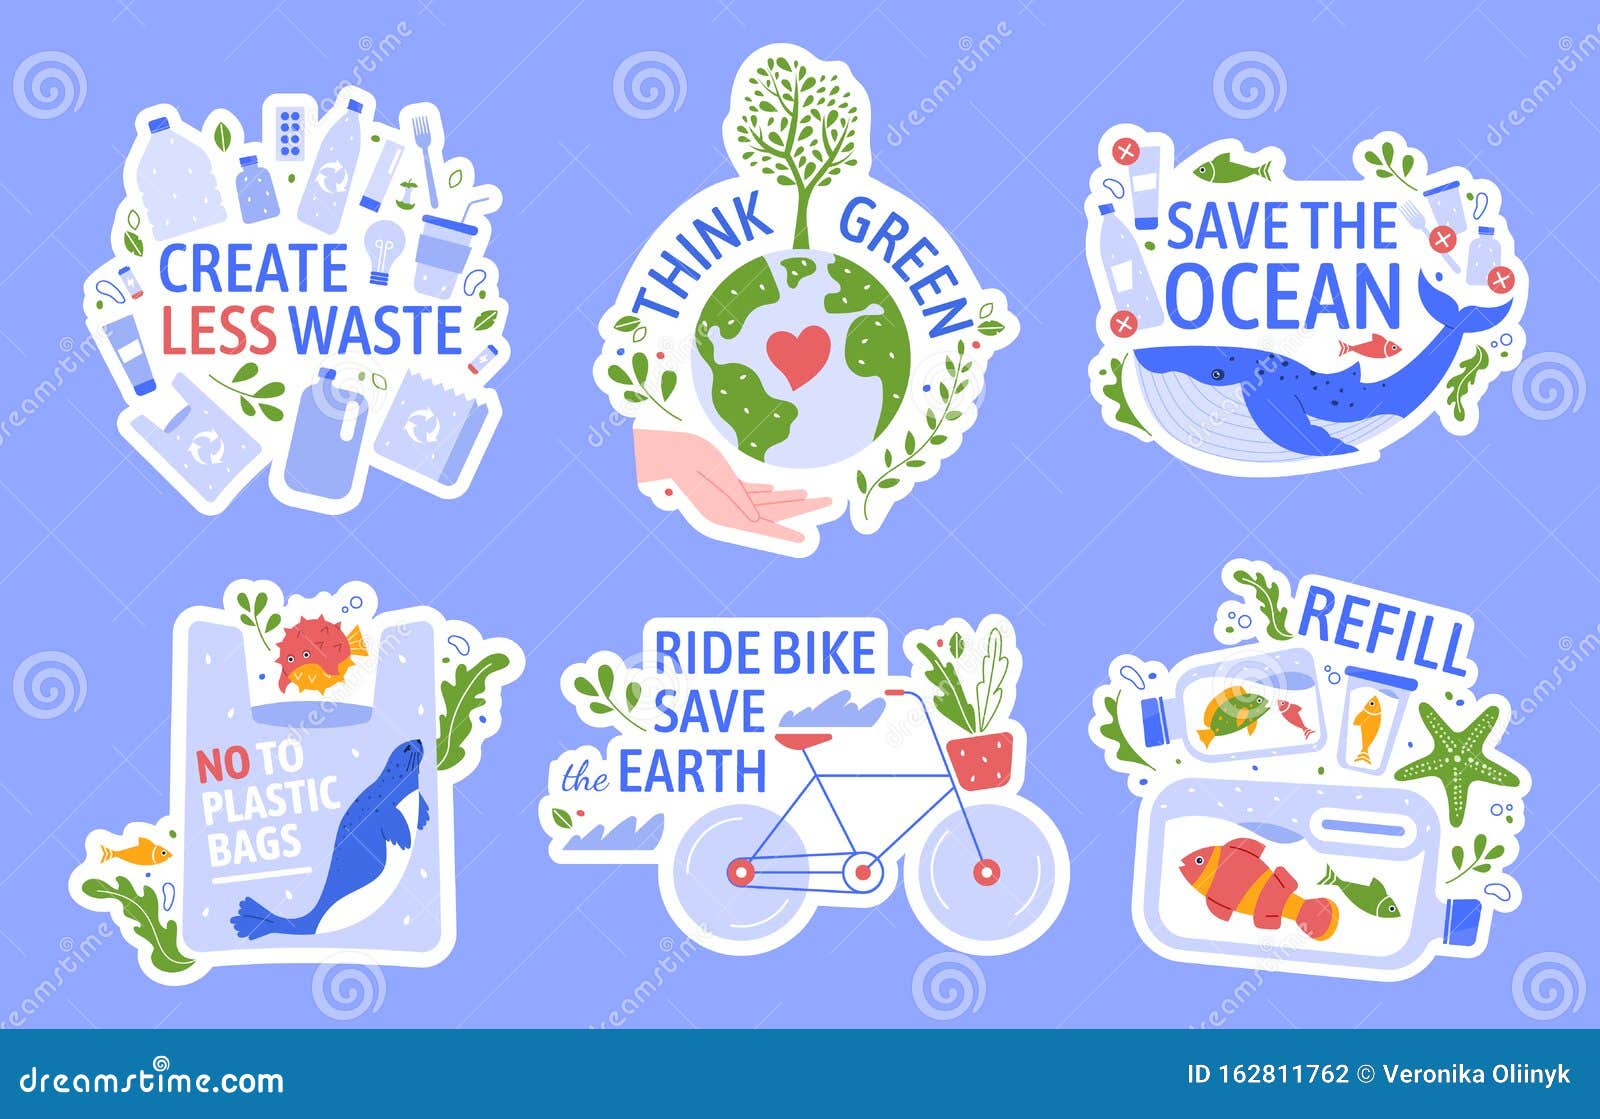 Ecology Protecting. Save the Environment, Zero Waste, Save the ...